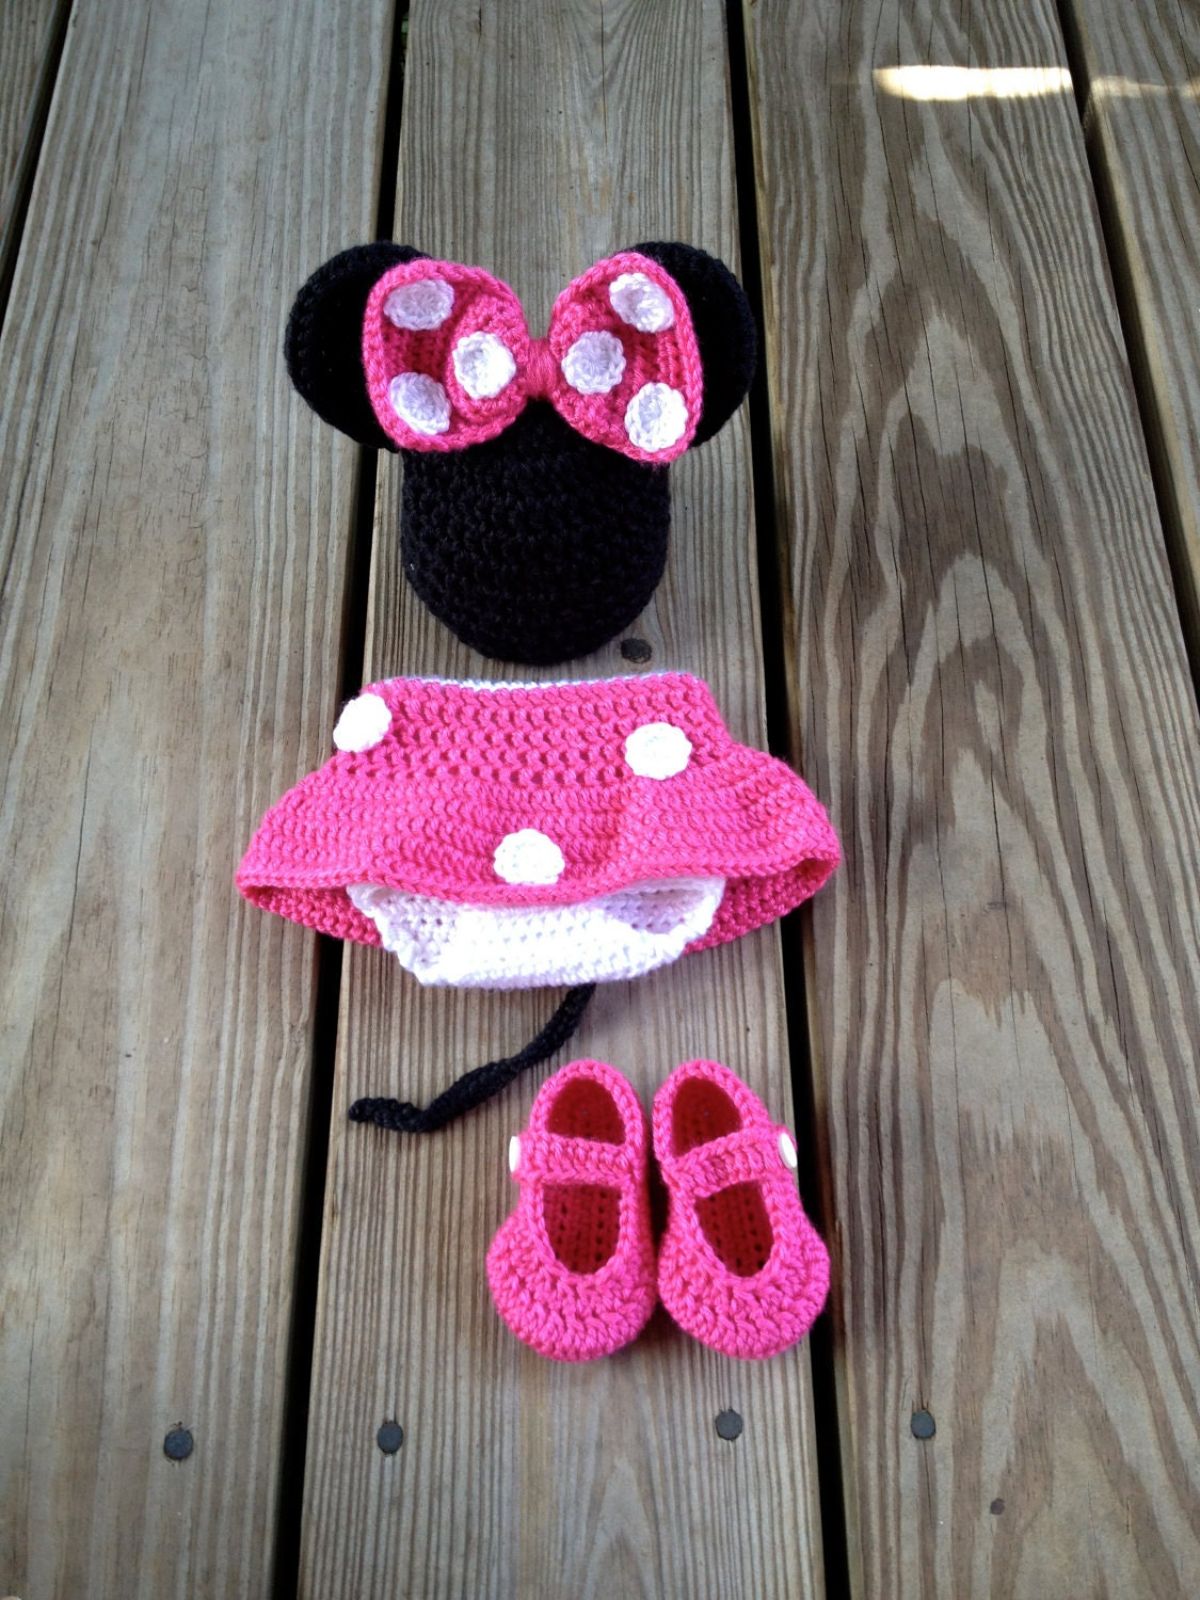 Newborn Minnie Mouse costume with a pink skirt with white spots, pink shoes, and a black beanie with a large pink and white spotted bow in the center.